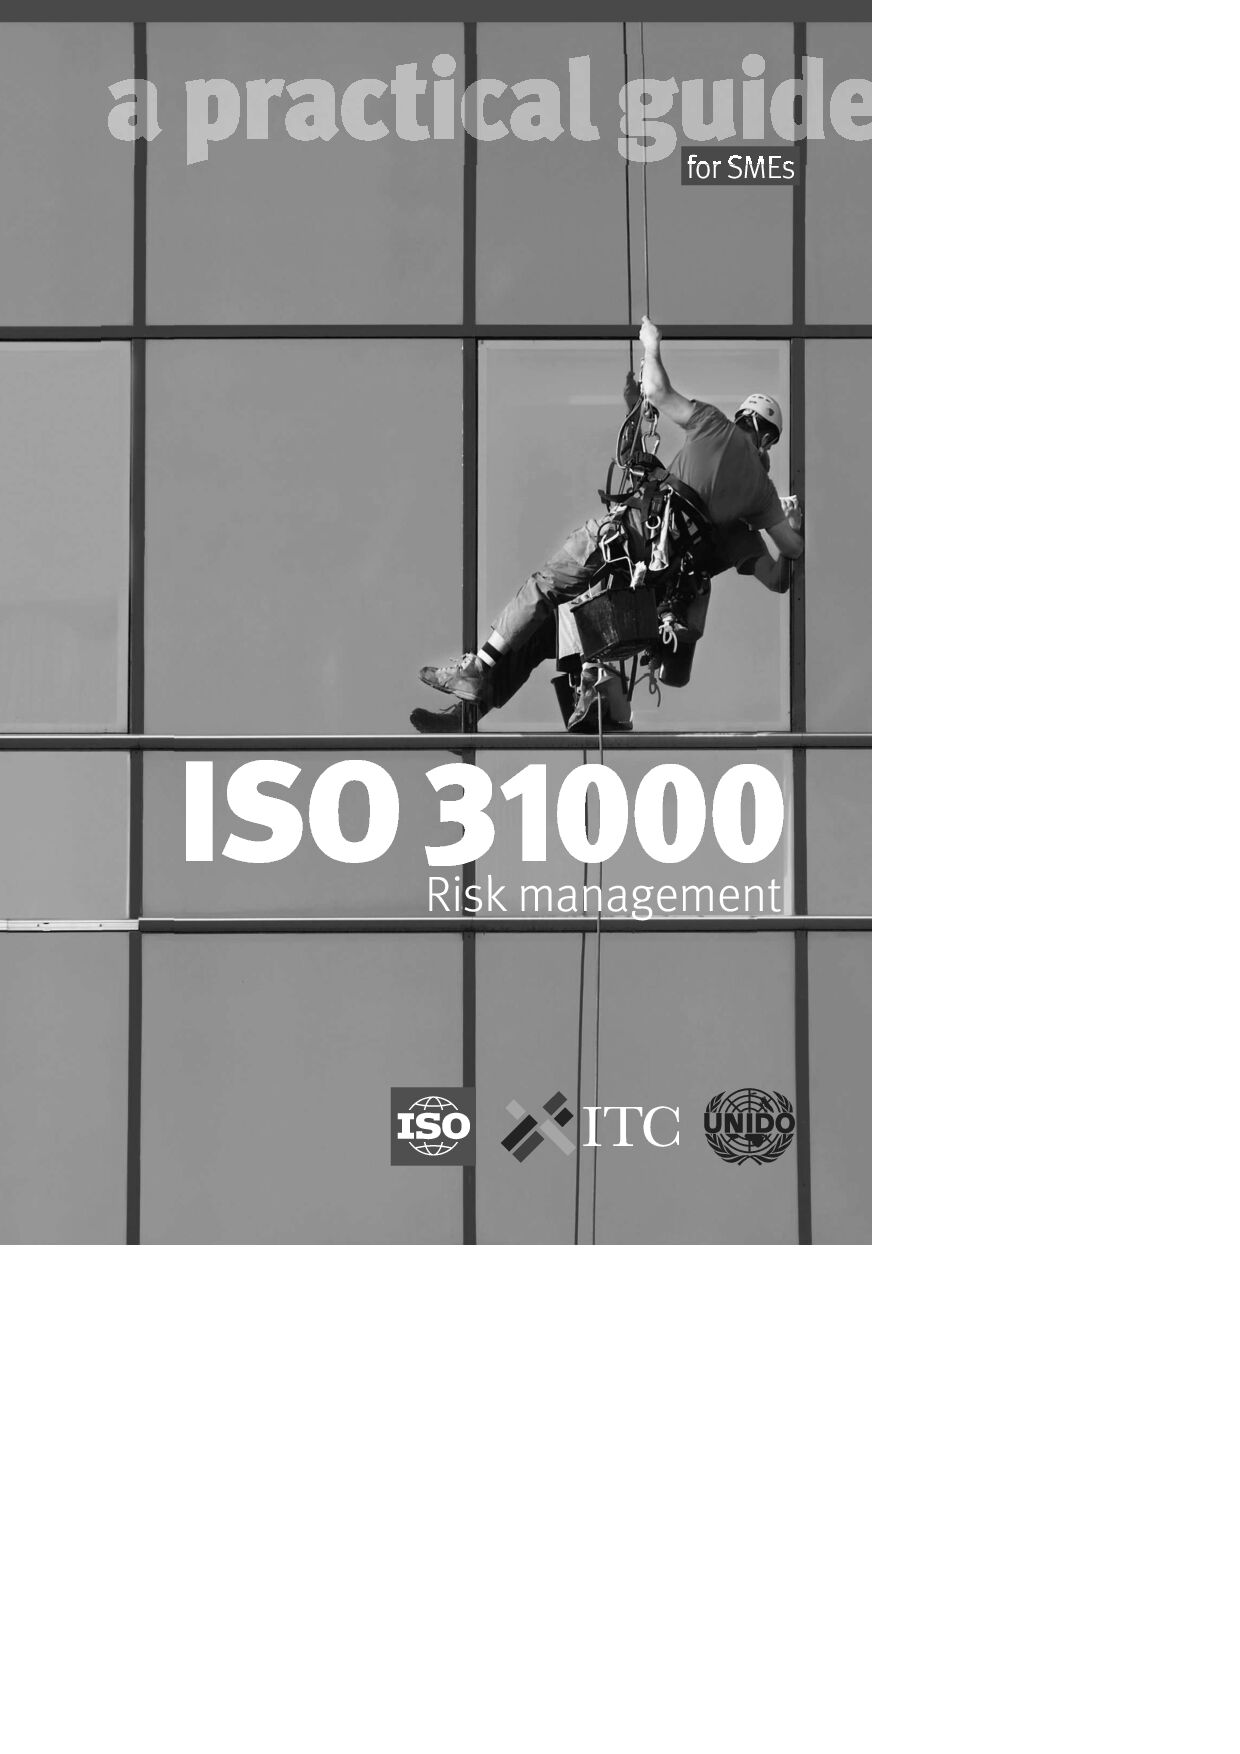 ISO 31000 Risk management - A practical guide for SMEs 2015